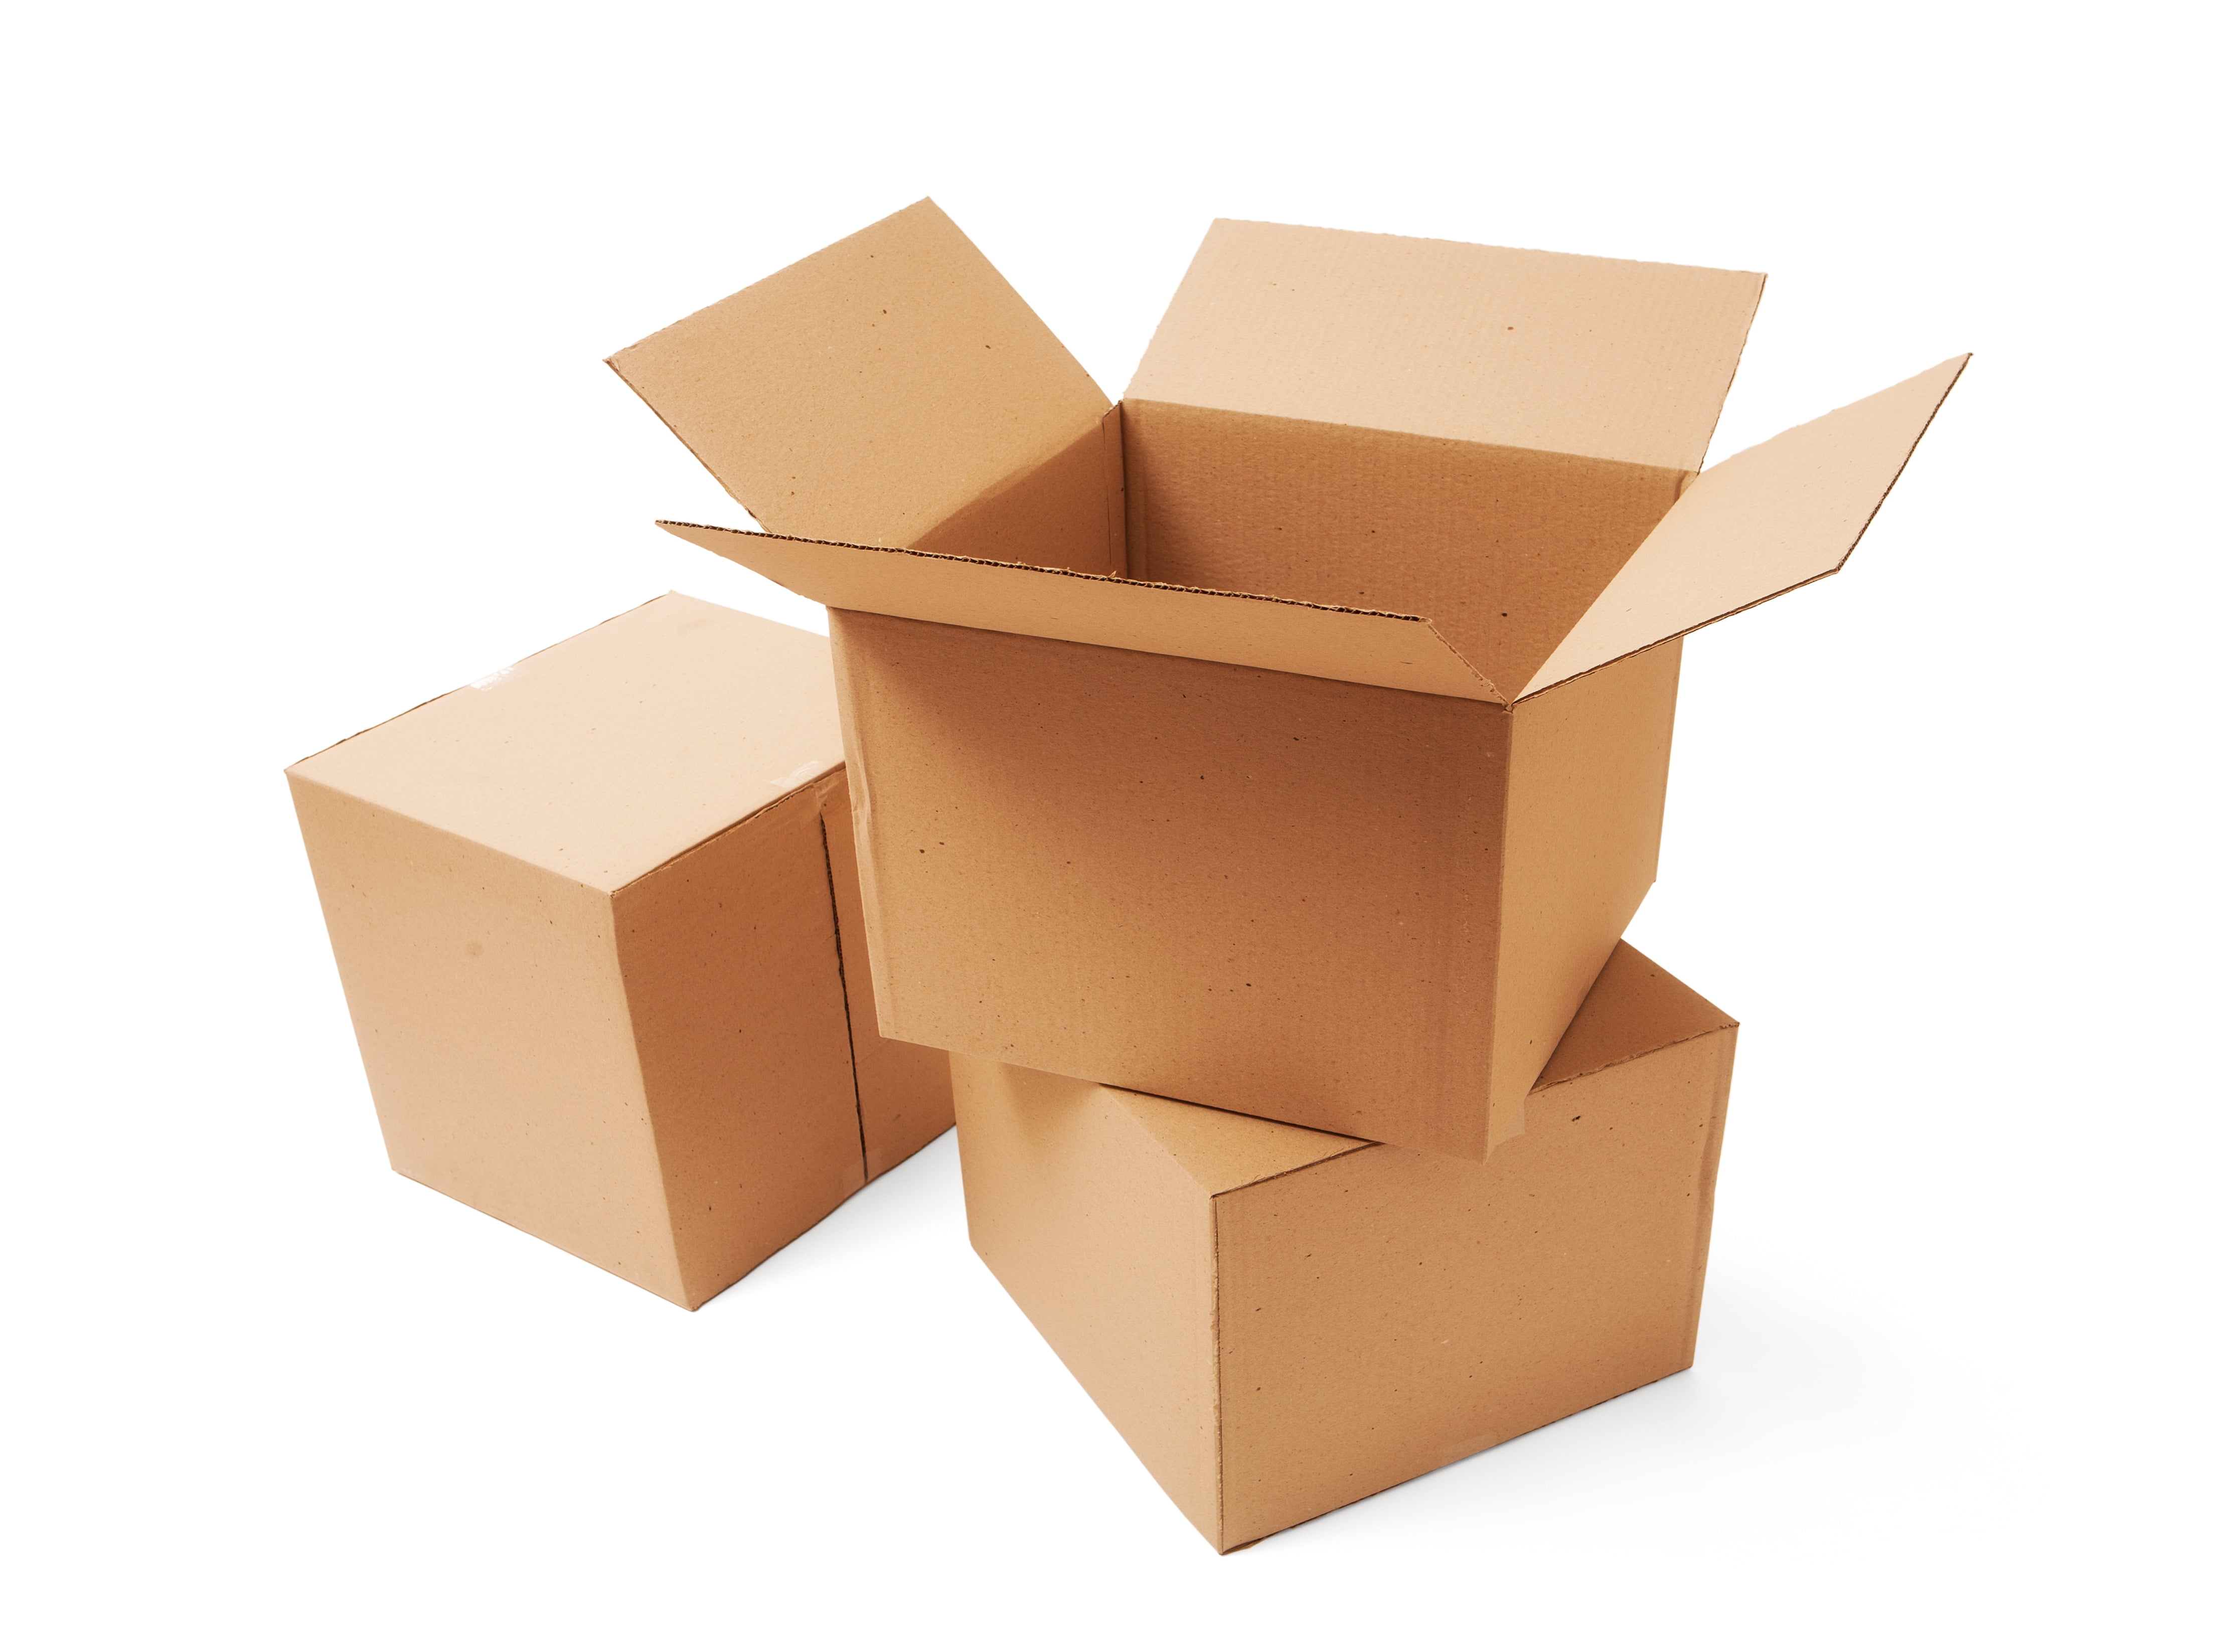 9X9X9 Cardboard Packing Mailing Shipping Corrugated Box Cartons Moving Many QTY